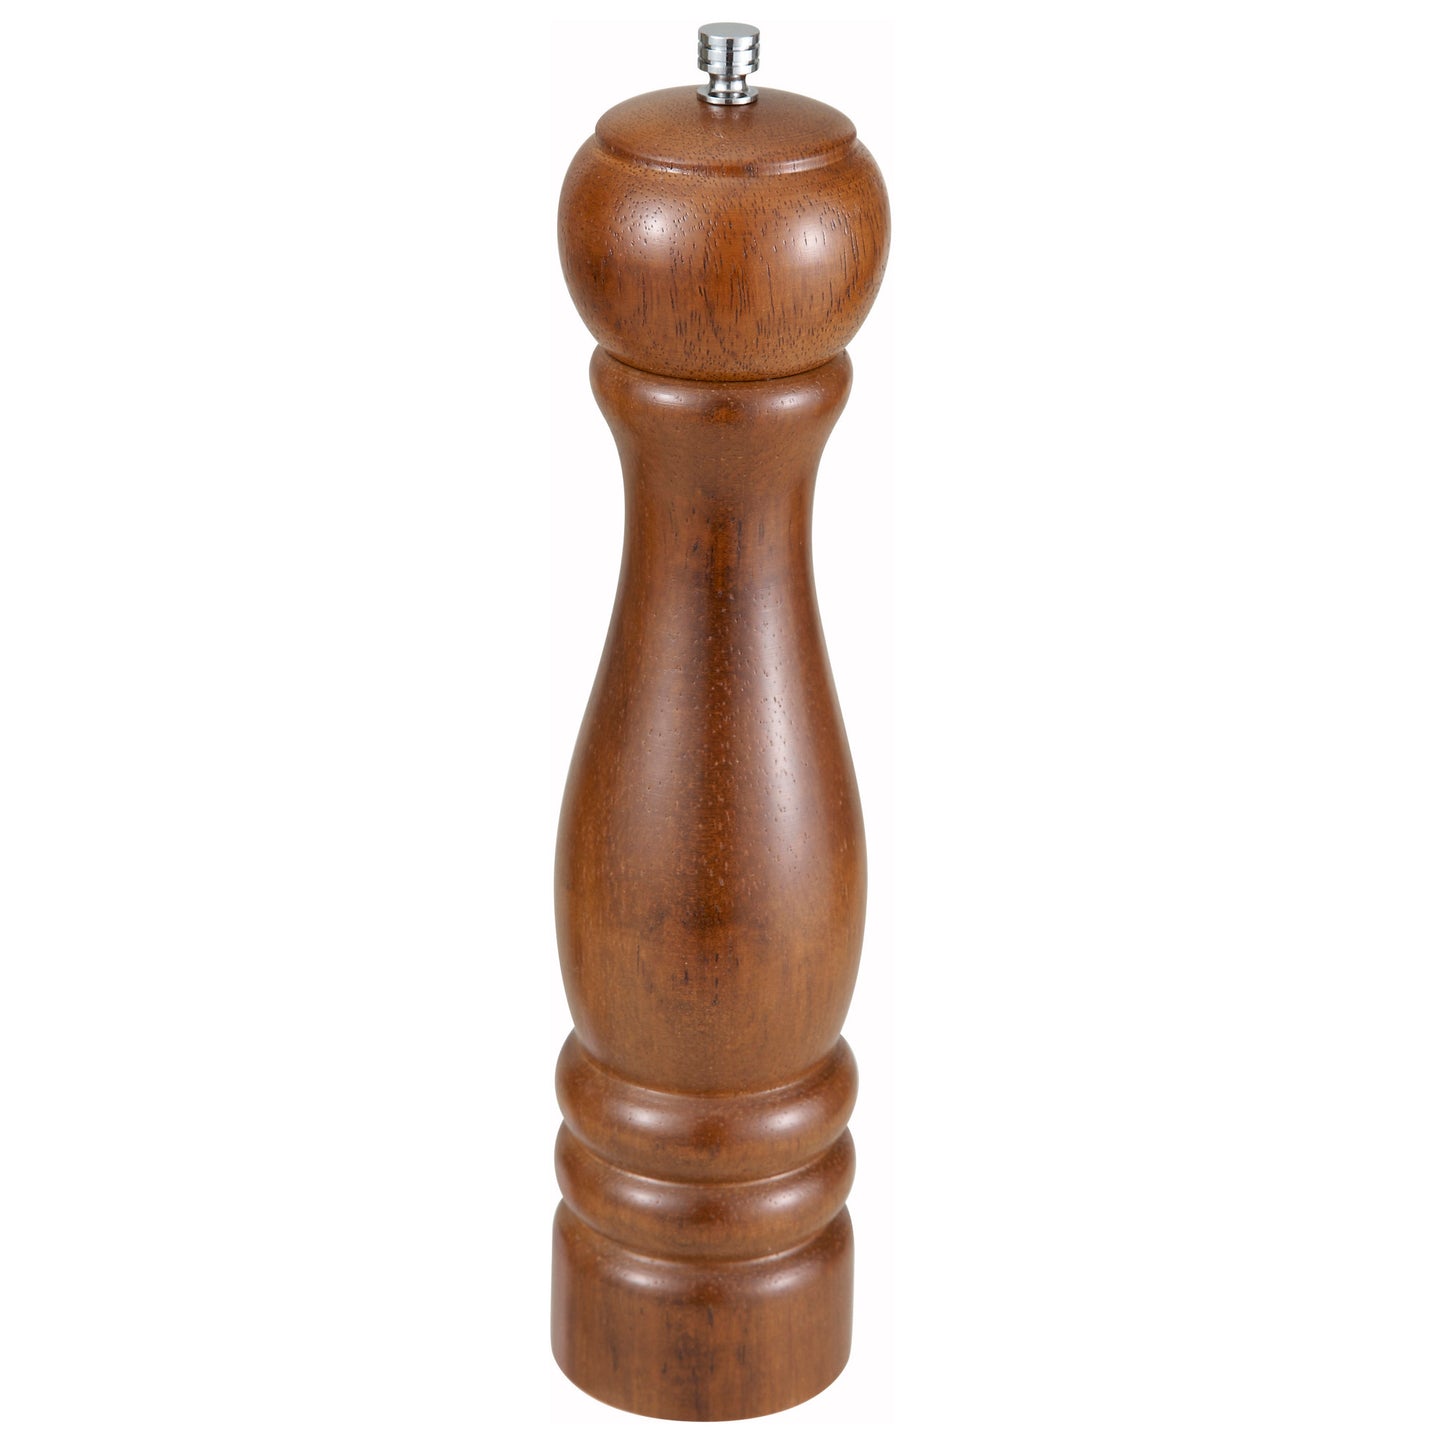 WPM-10 - 10" Peppermill, Russet Brown Wood